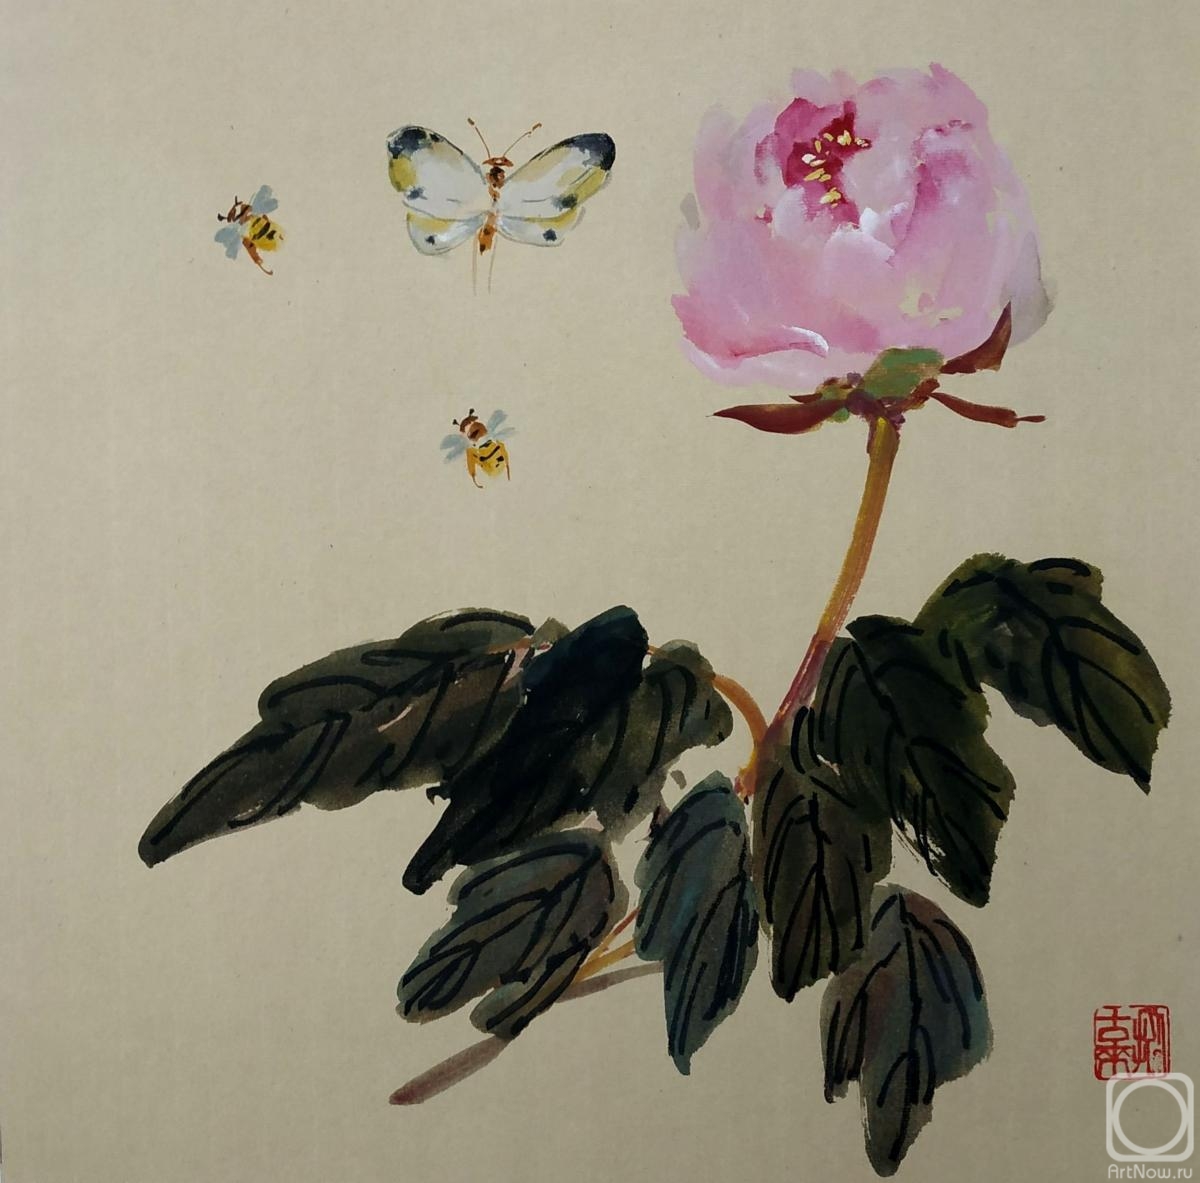 Mishukov Nikolay. Music for peonies and butterflies